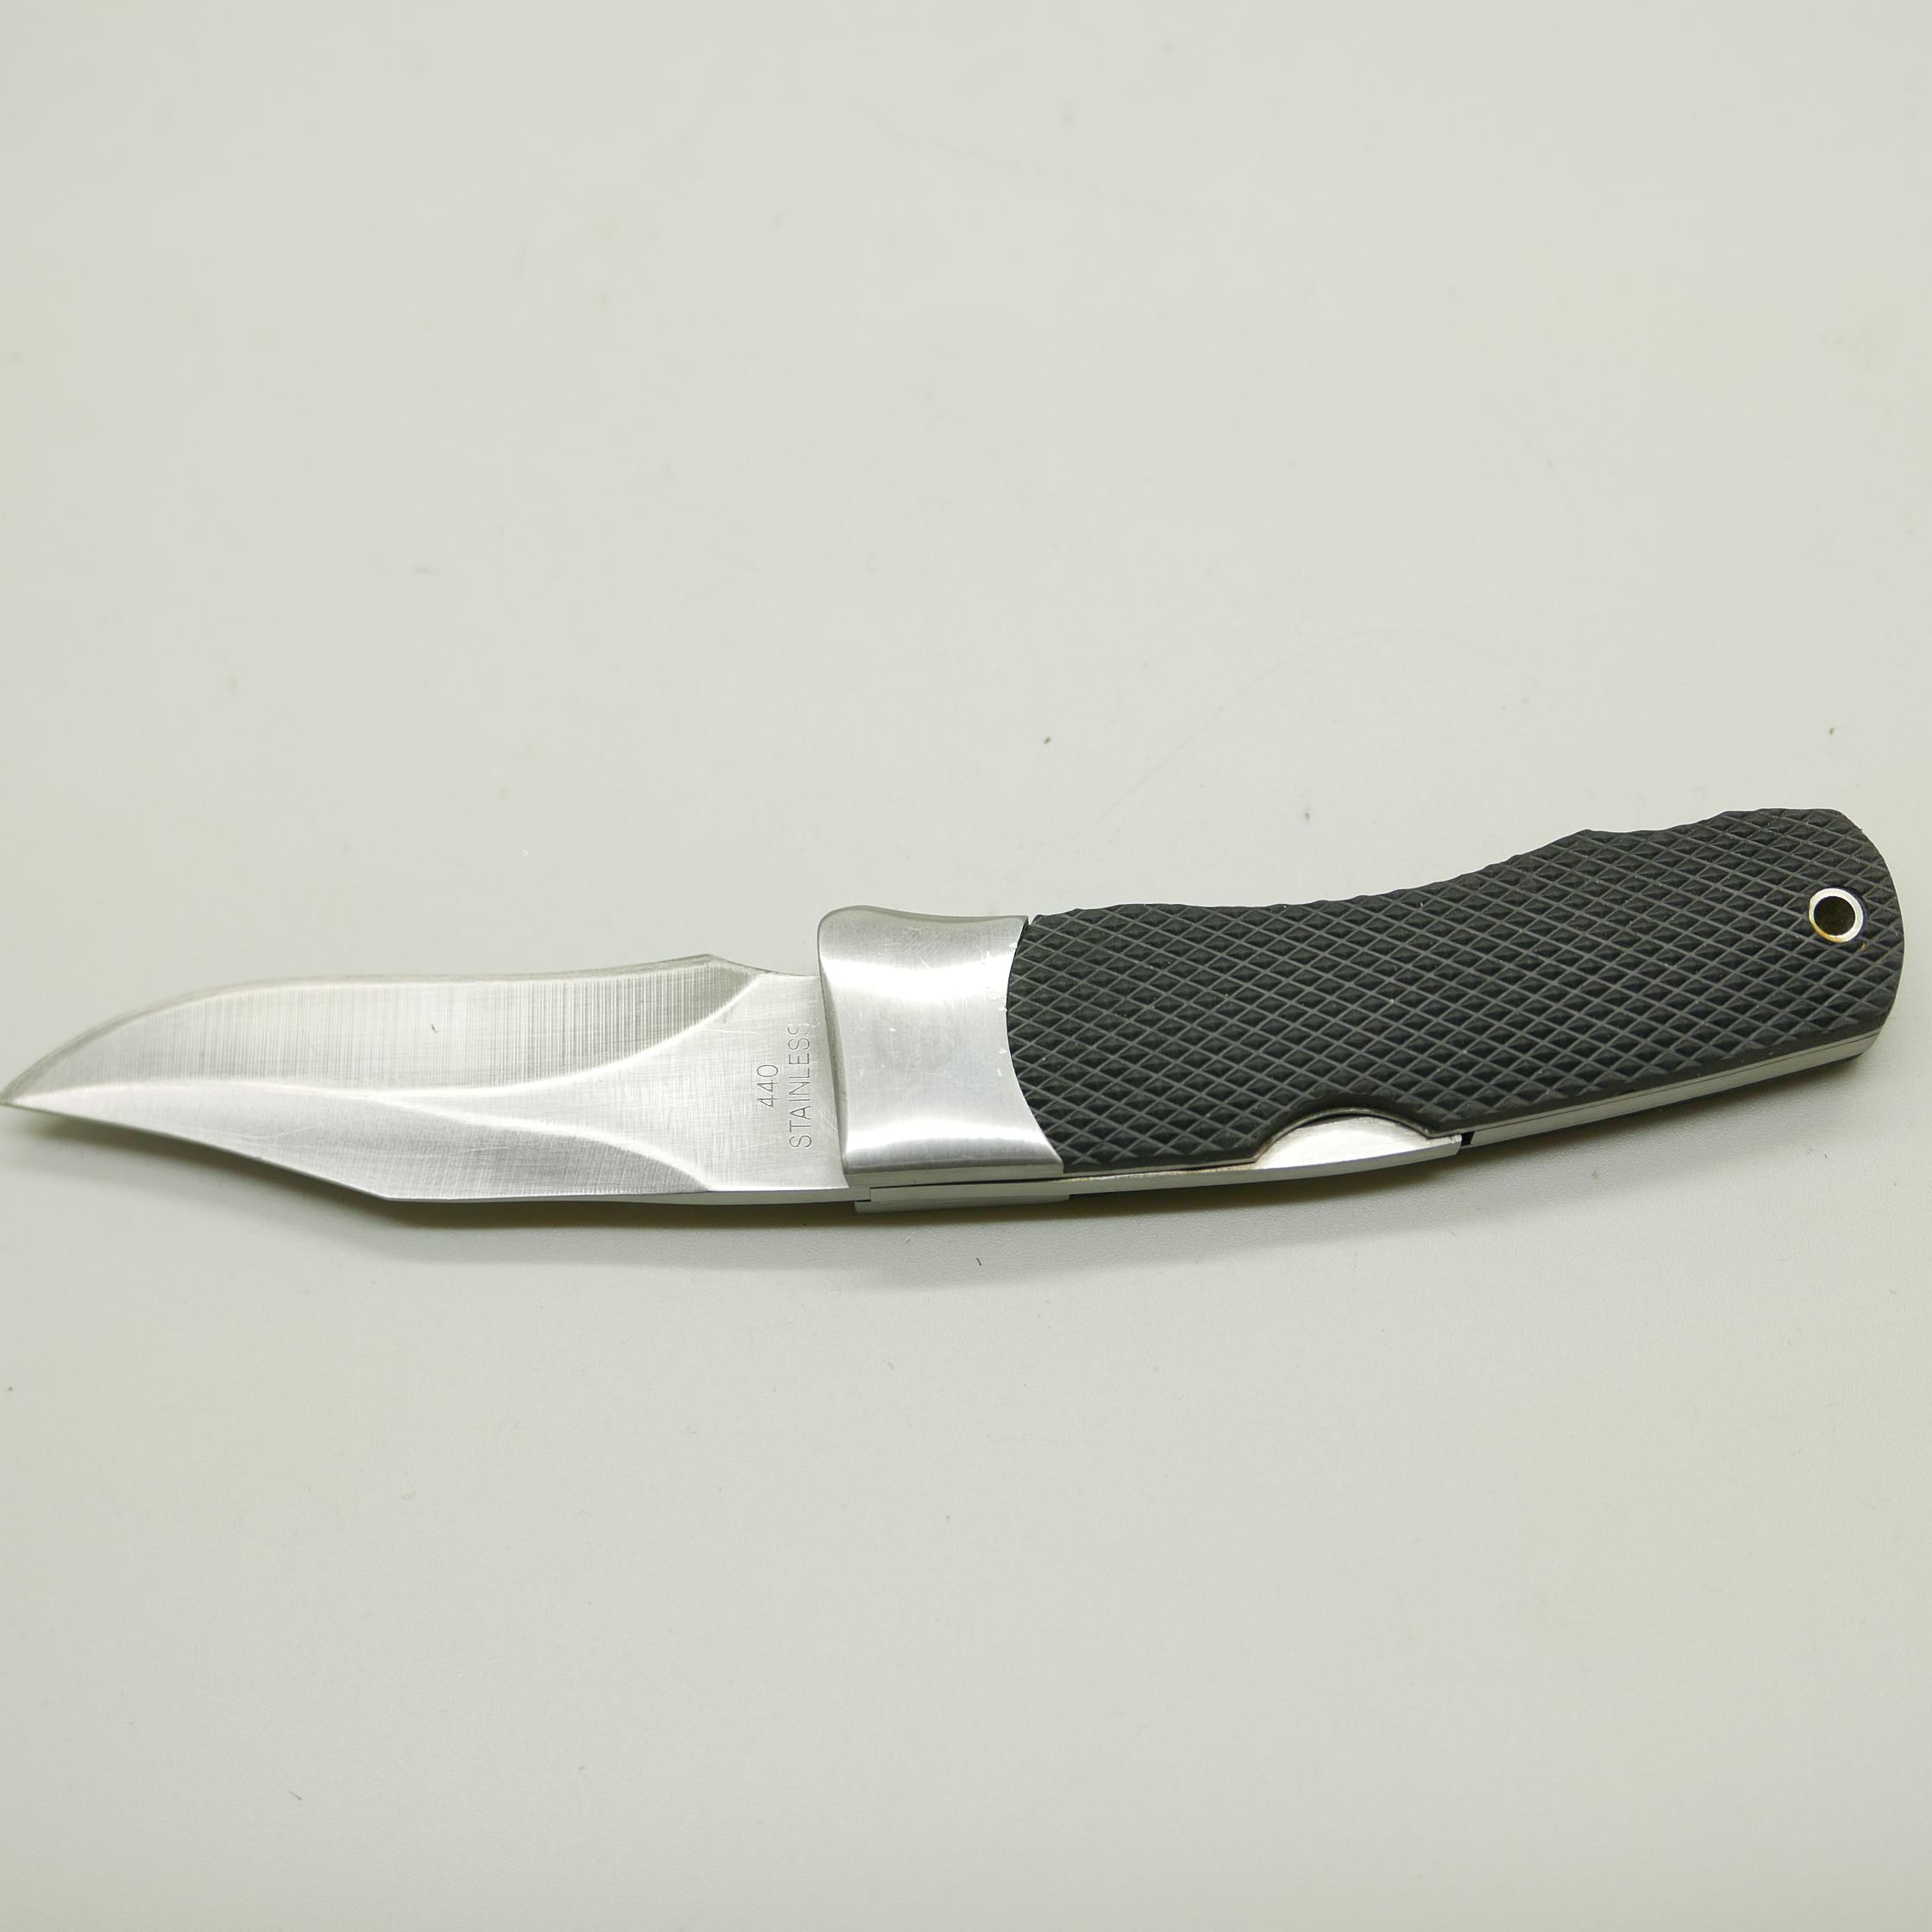 A collection of knives including Wostenholm and Kershaw - Image 4 of 5